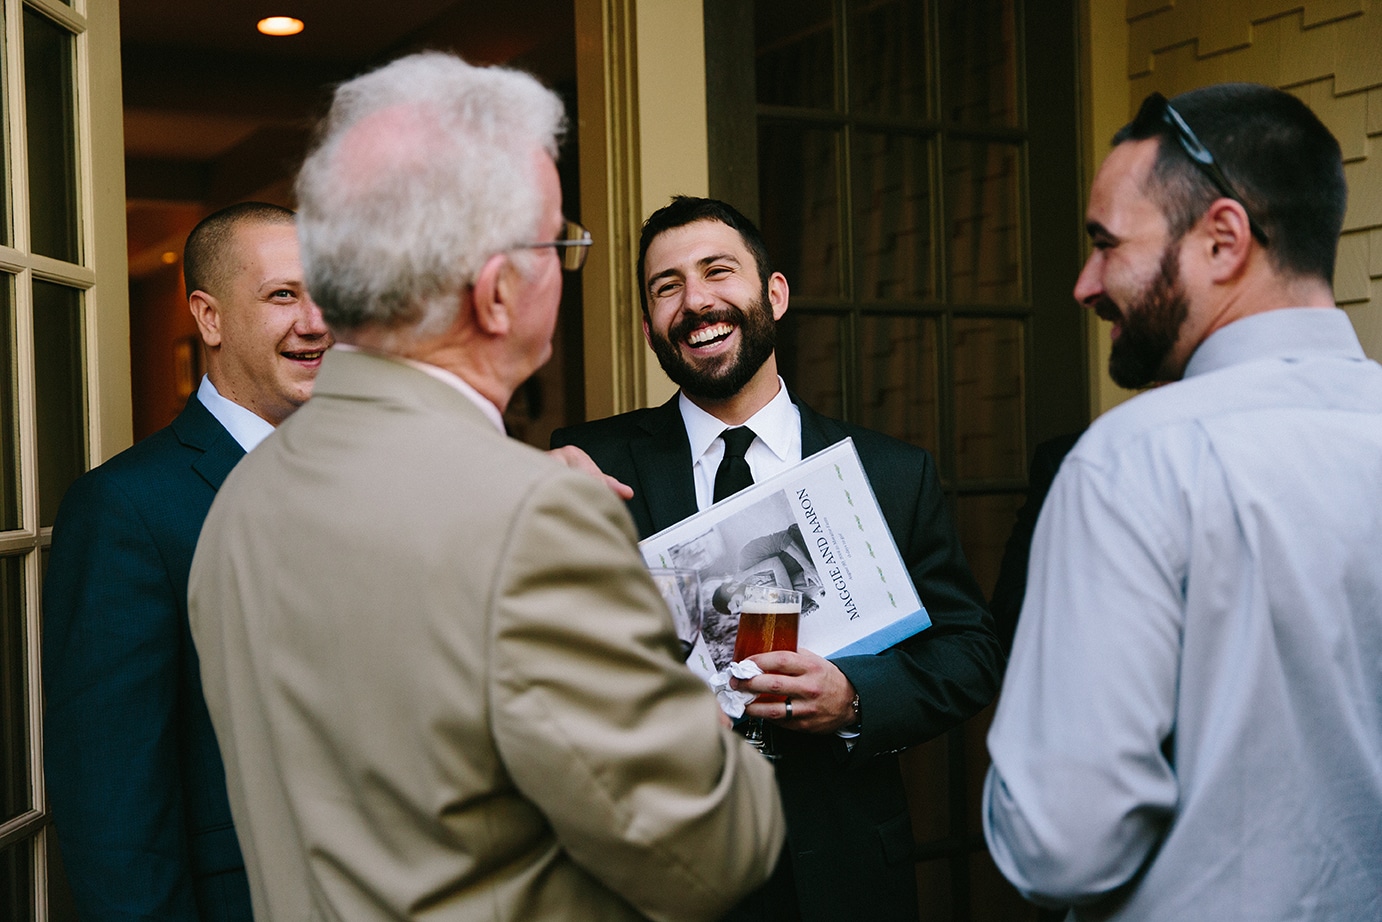 This documentary photograph of groom laughing with his guests is one of the best wedding photographs of 2016